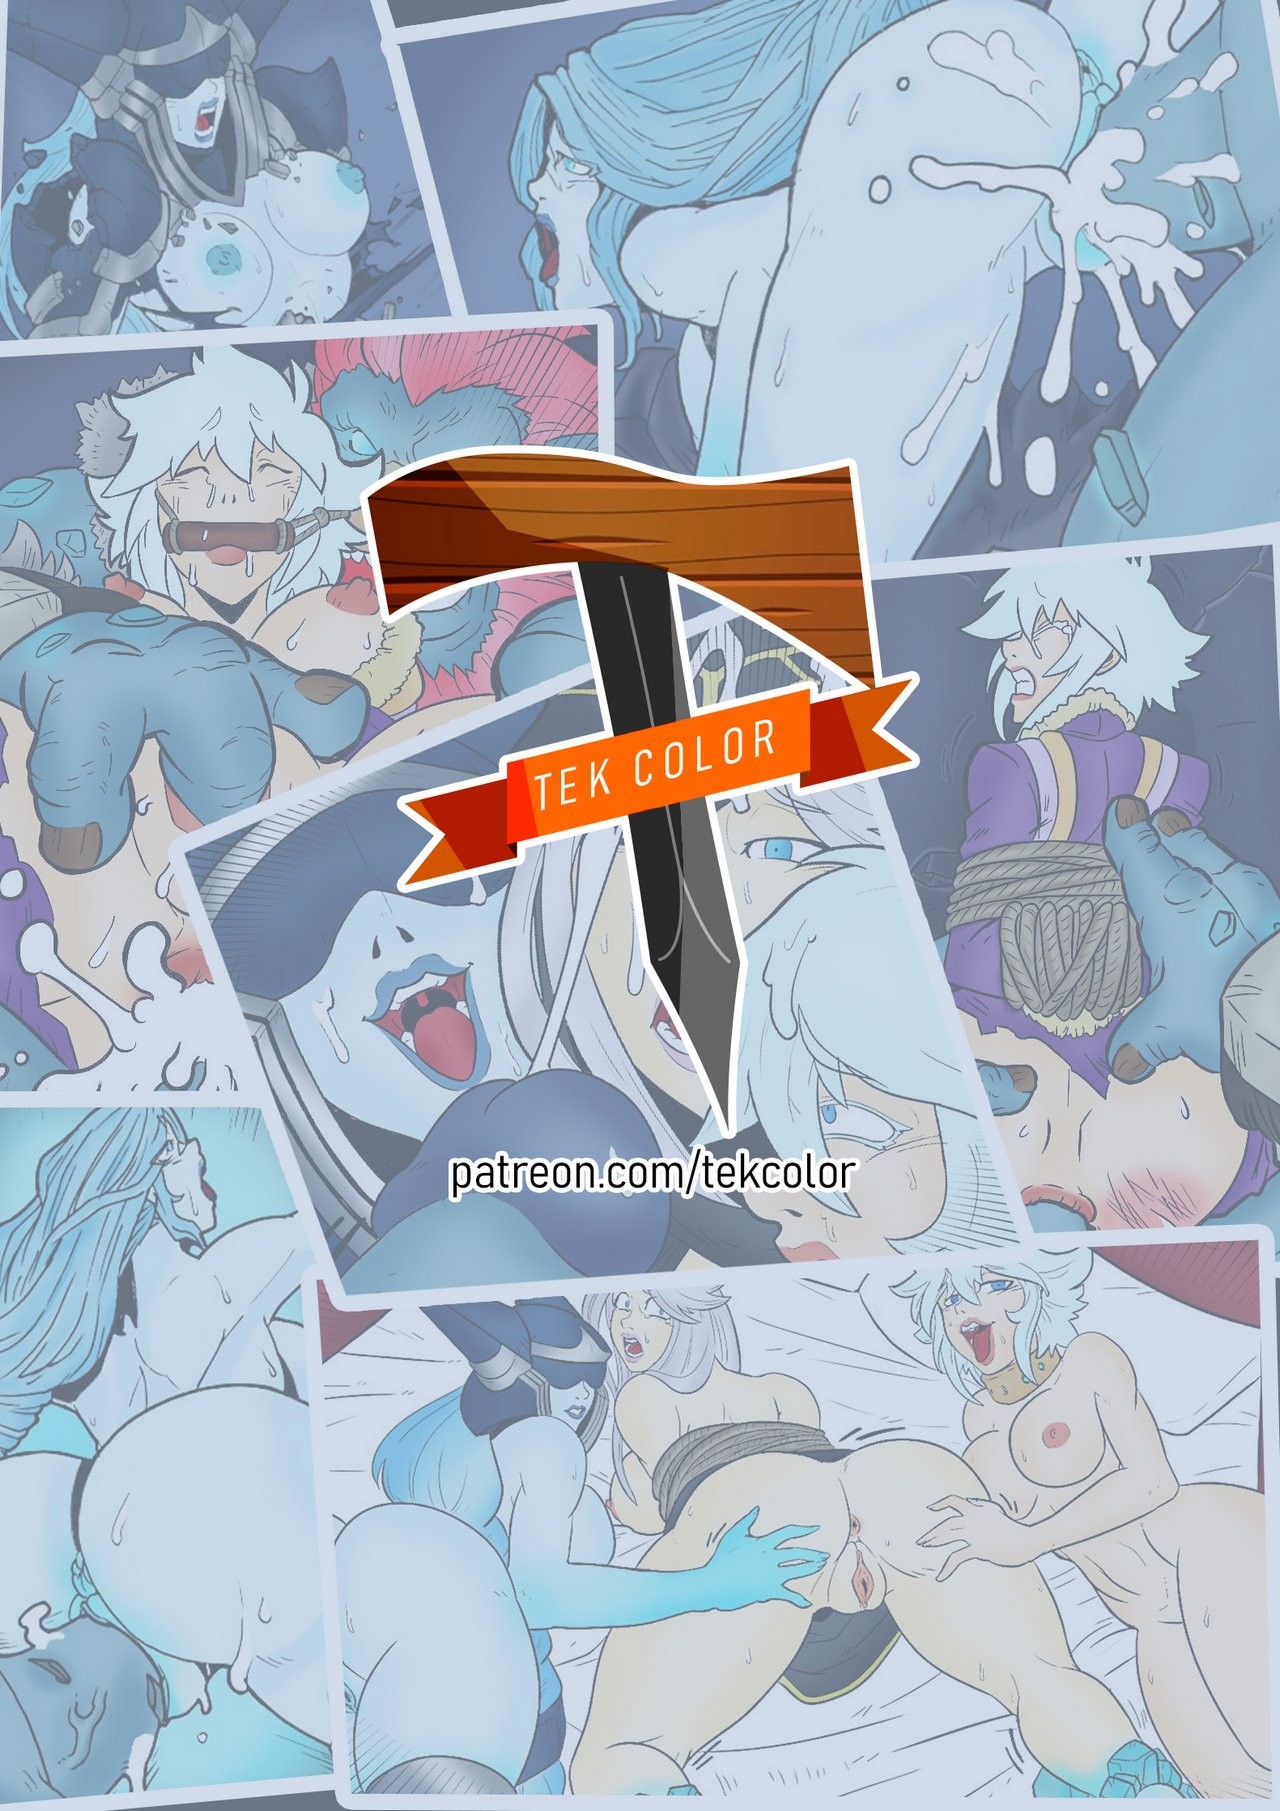 Tales of the Troll King ch. 1 - 3 ] [Colorized] porn comic picture 57